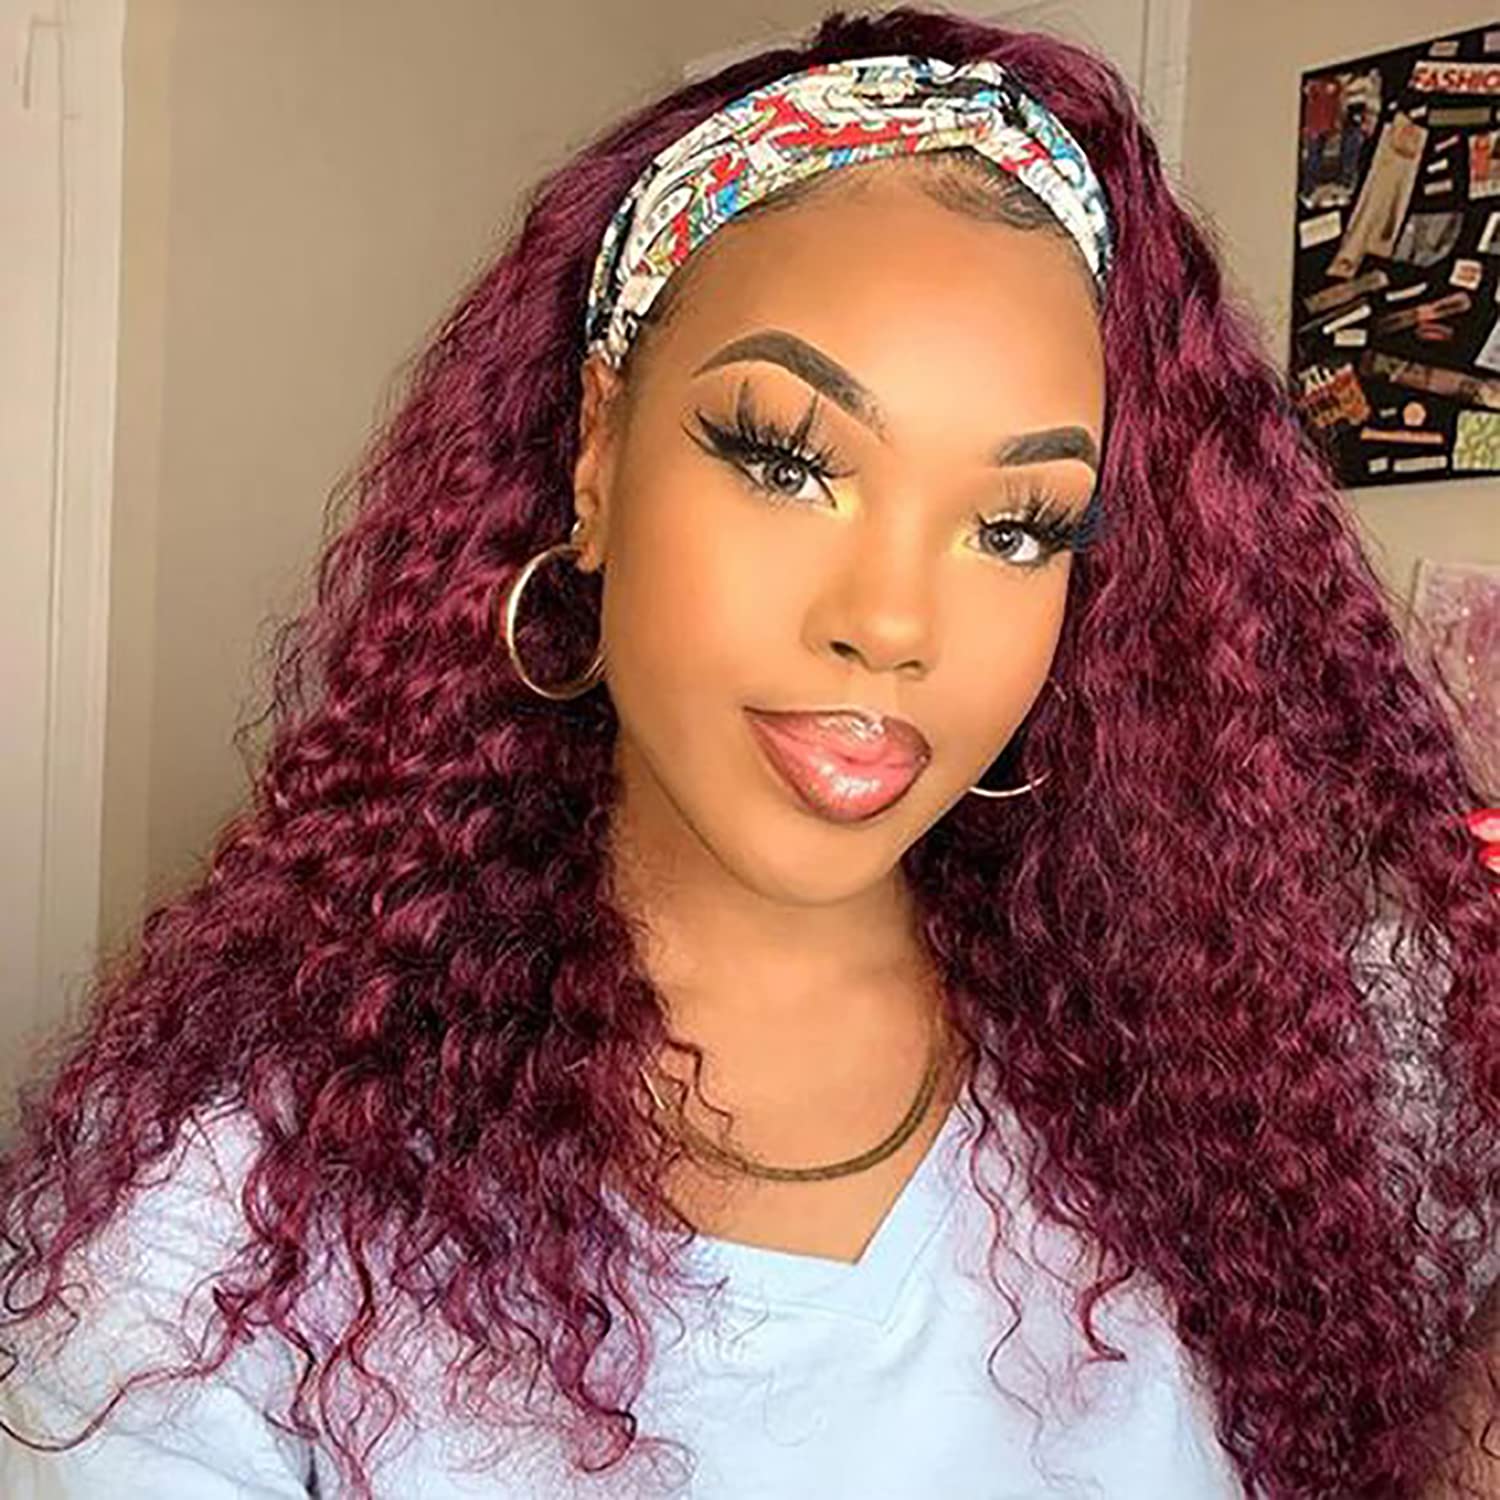 Deep Wave Headband Wigs for Women Long Black Deep Curly Wig with Headbands Attached Glueless Water Wave Headband Wigs 22inch None Lace Front Wig 150 Density